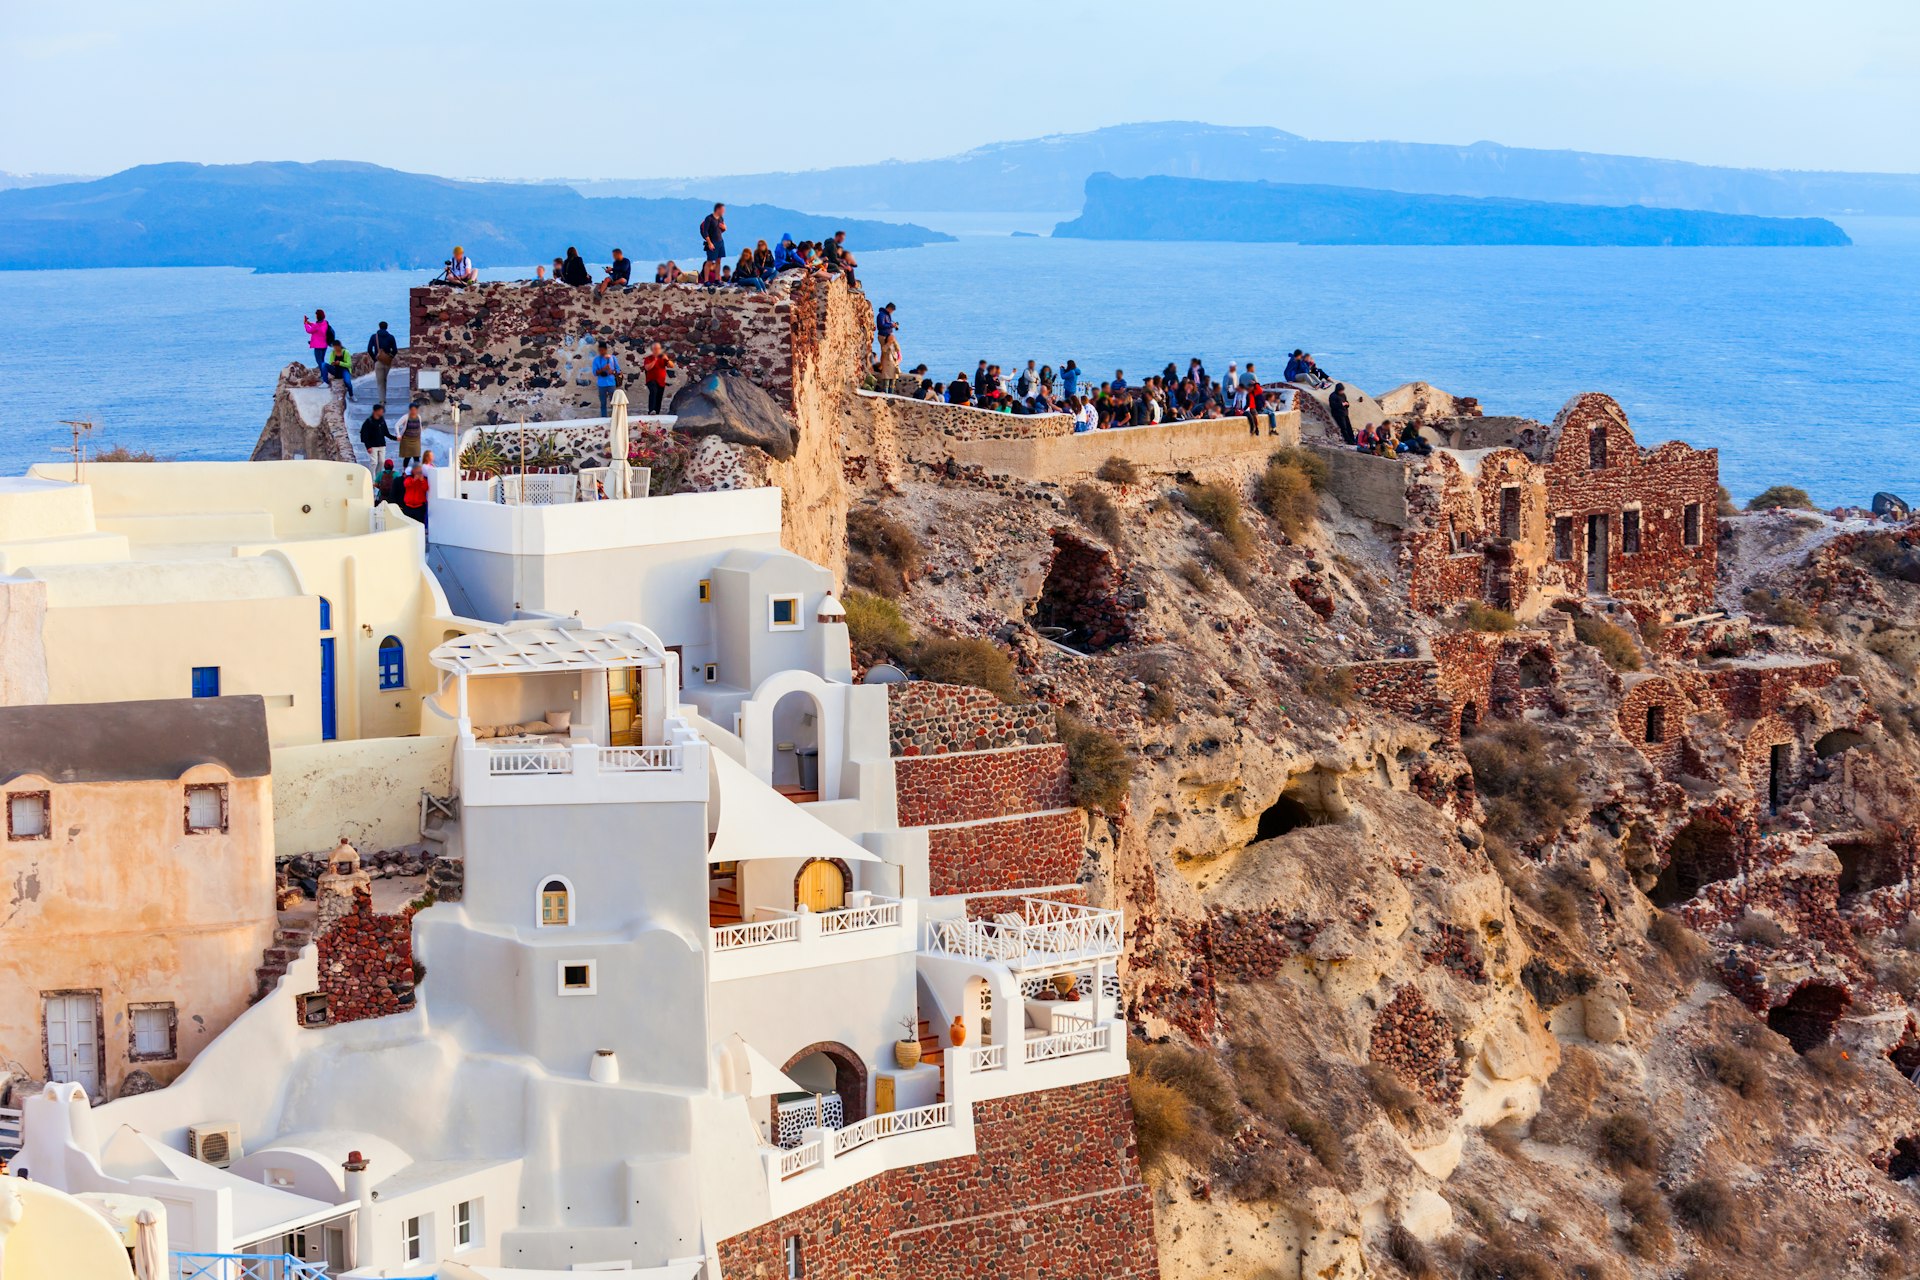 Tourists explore the Byzantine castle ruins on top of a hill in Santorini